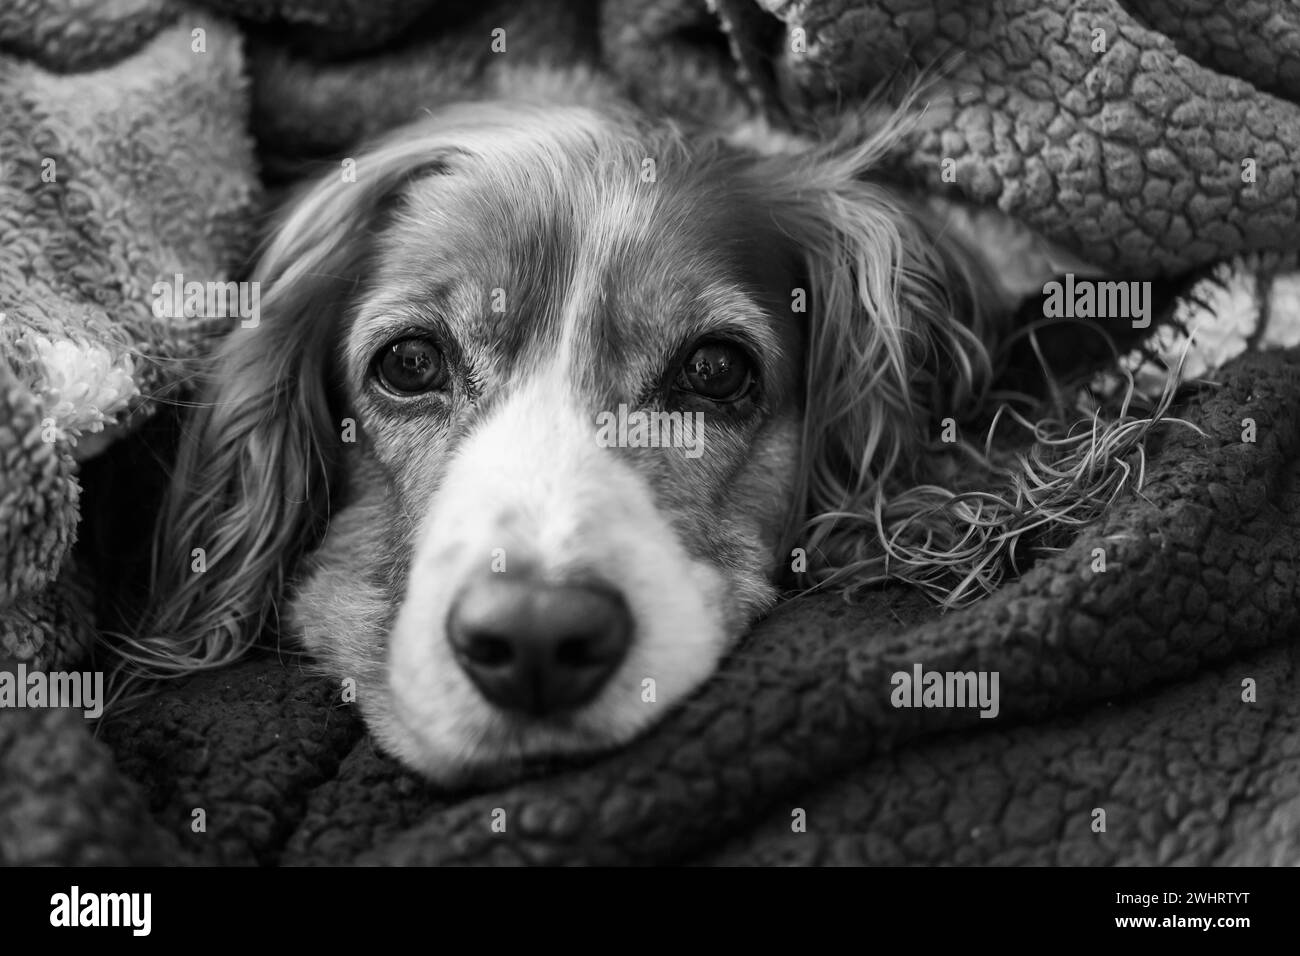 Cute dog pet wrapped in a blanket after taking a bath. Stock Photo